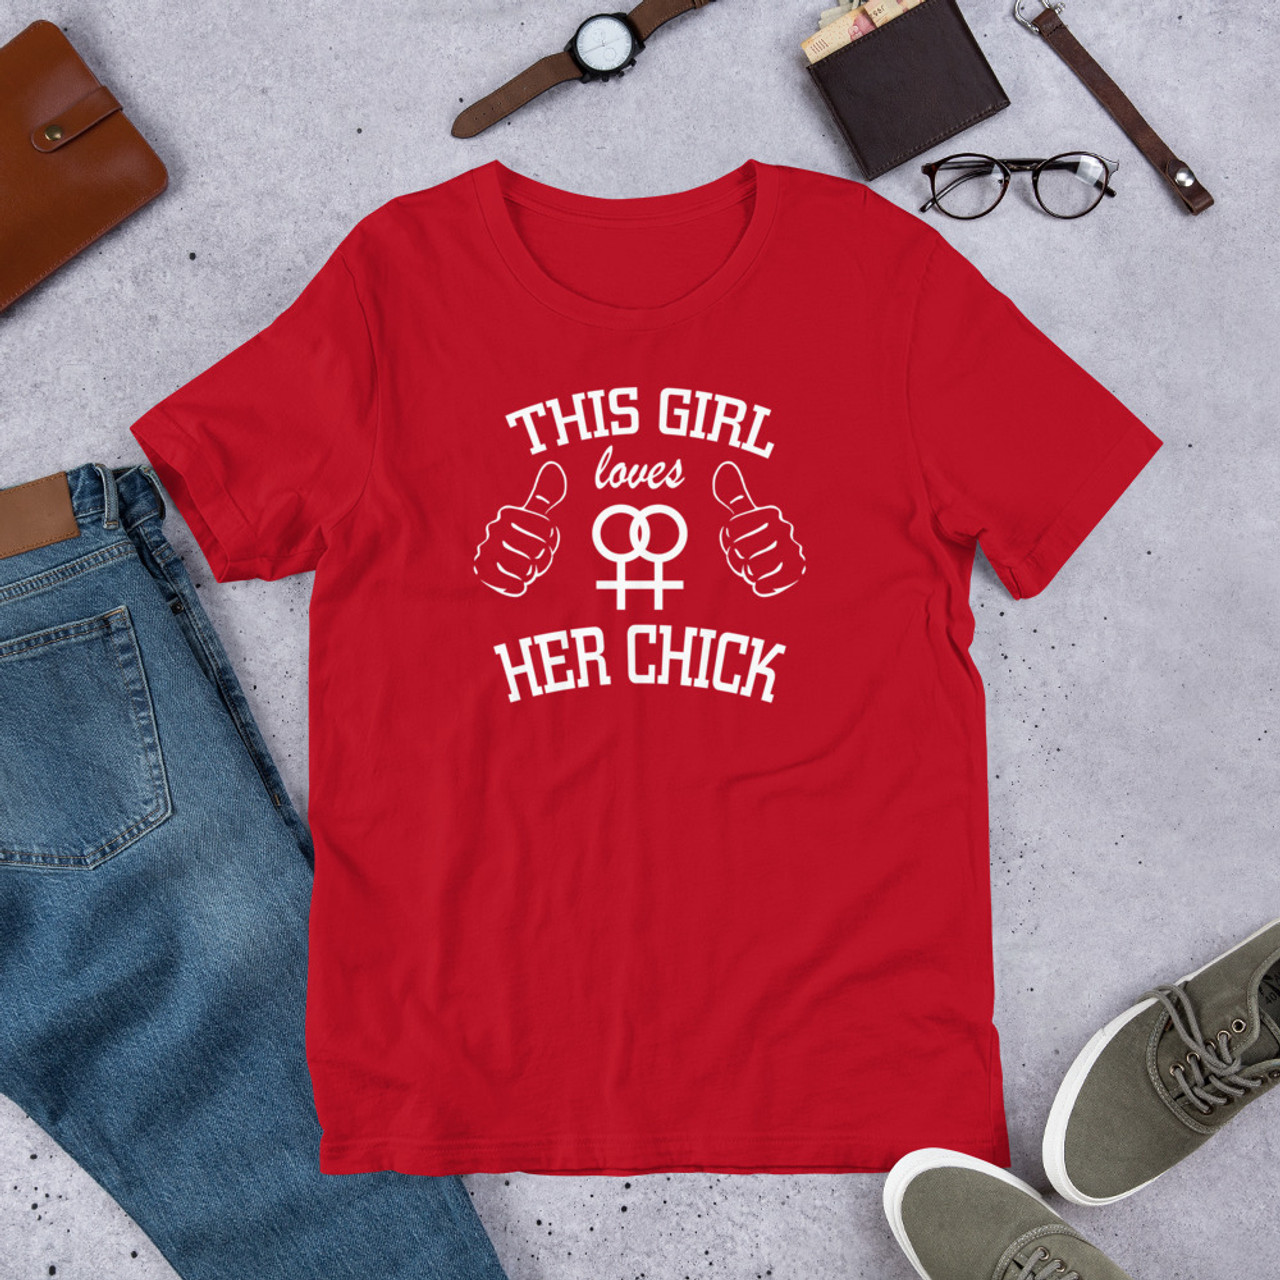 Red T-Shirt - Bella + Canvas 3001 This Girl Loves Her Chick